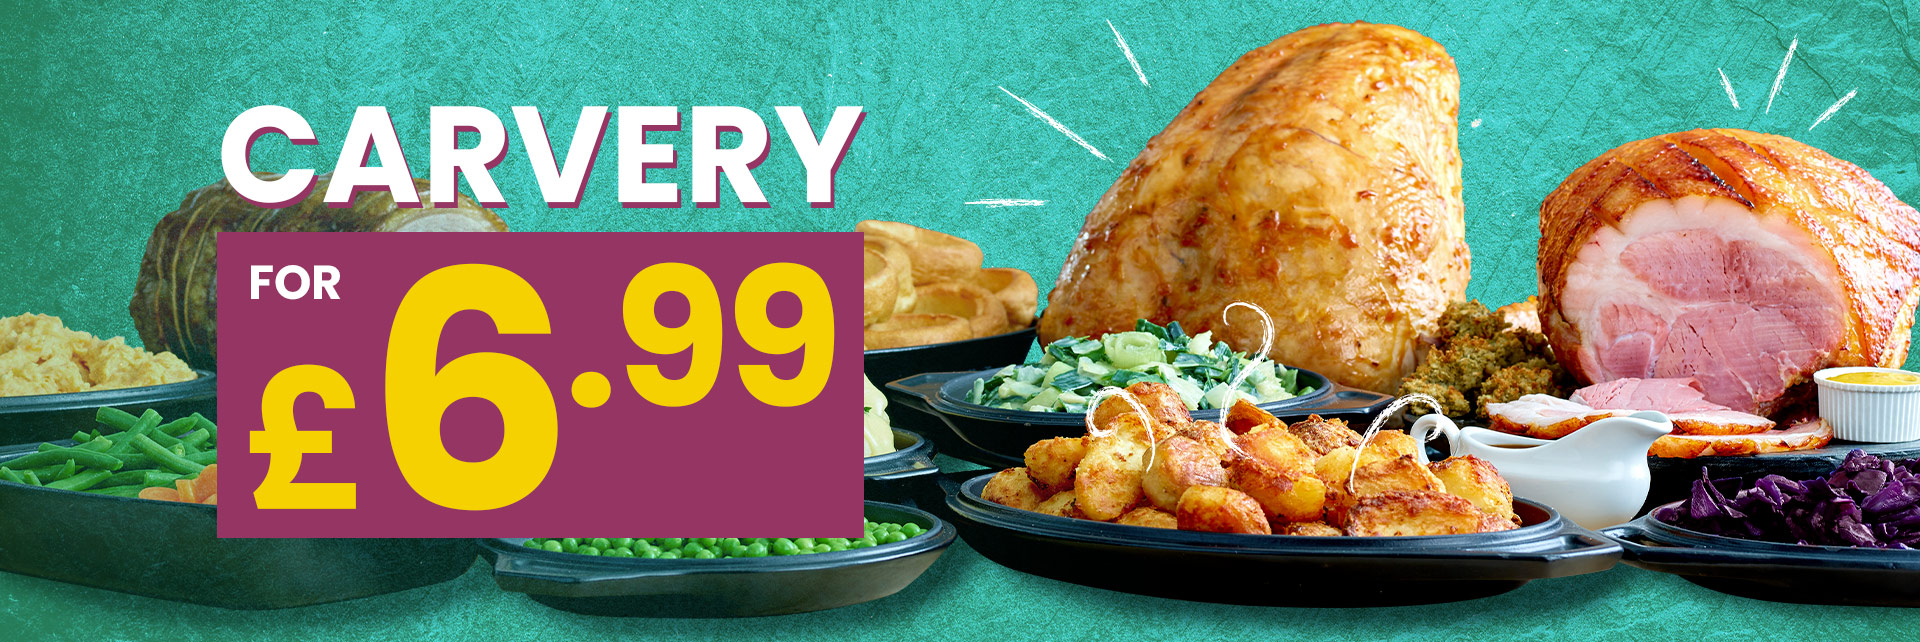 sizzling-offers-carvery-banner-6.99.jpg